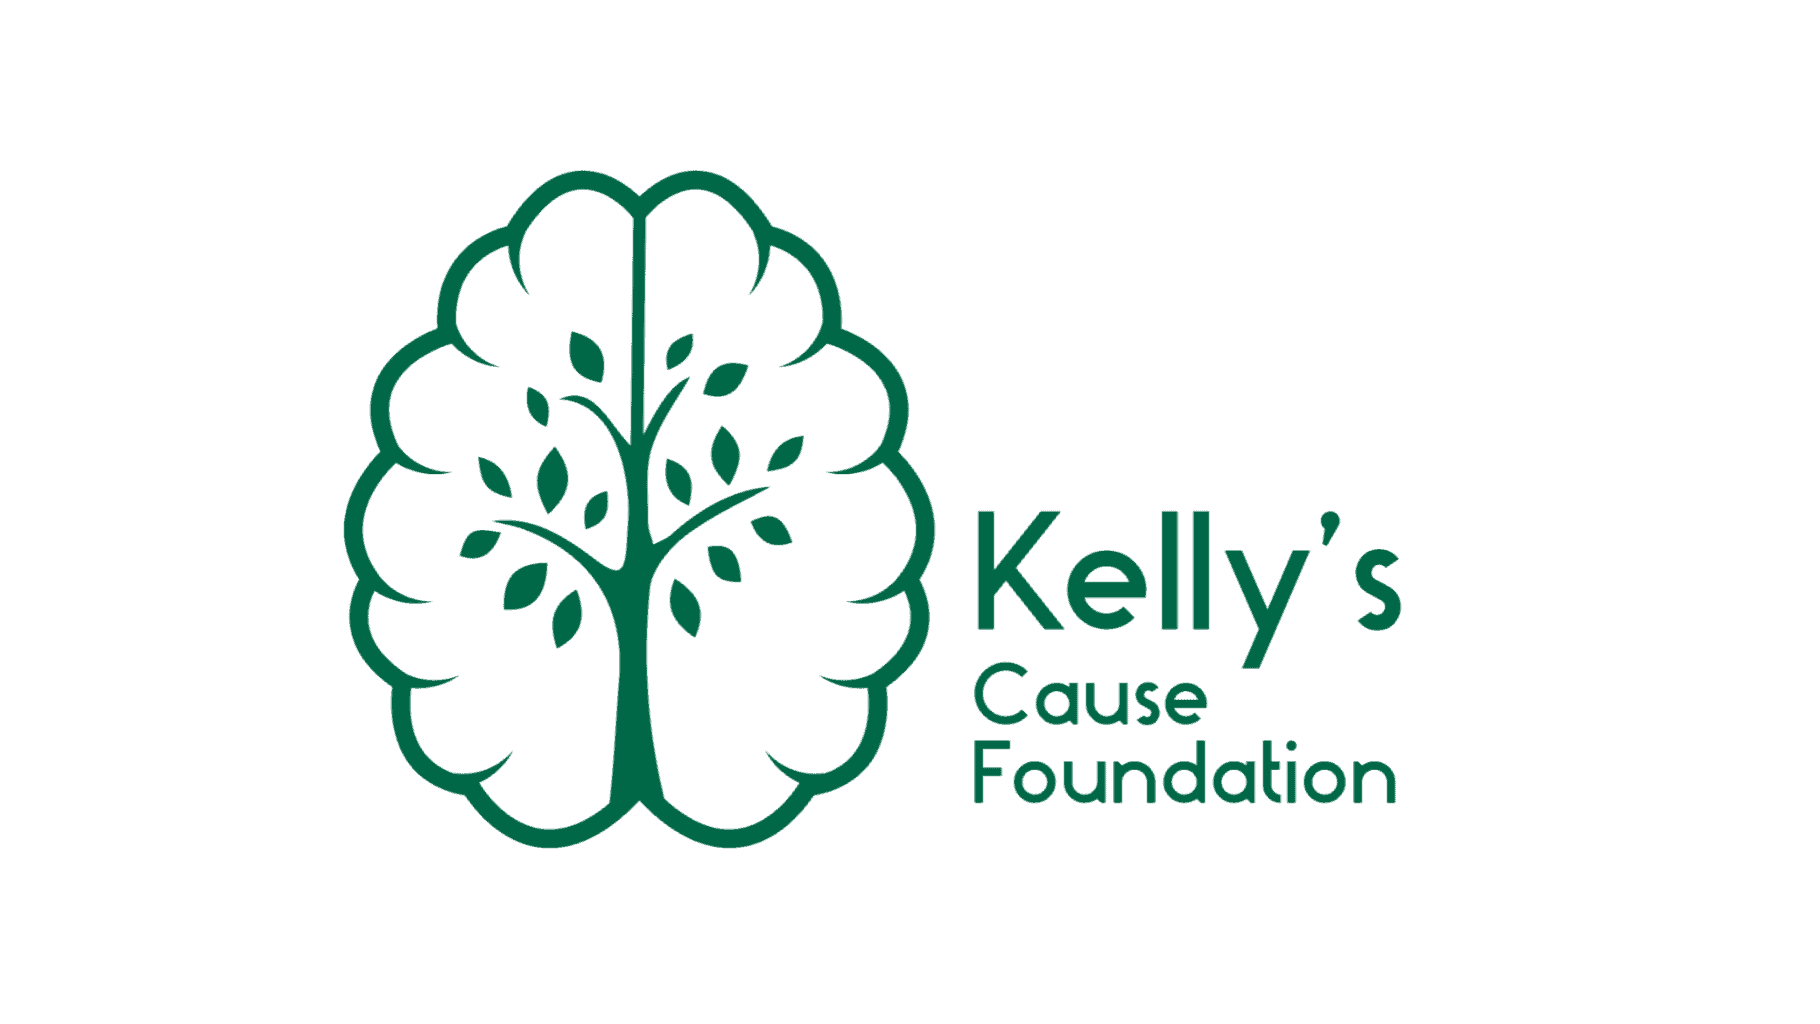 Kelly's Cause Foundation